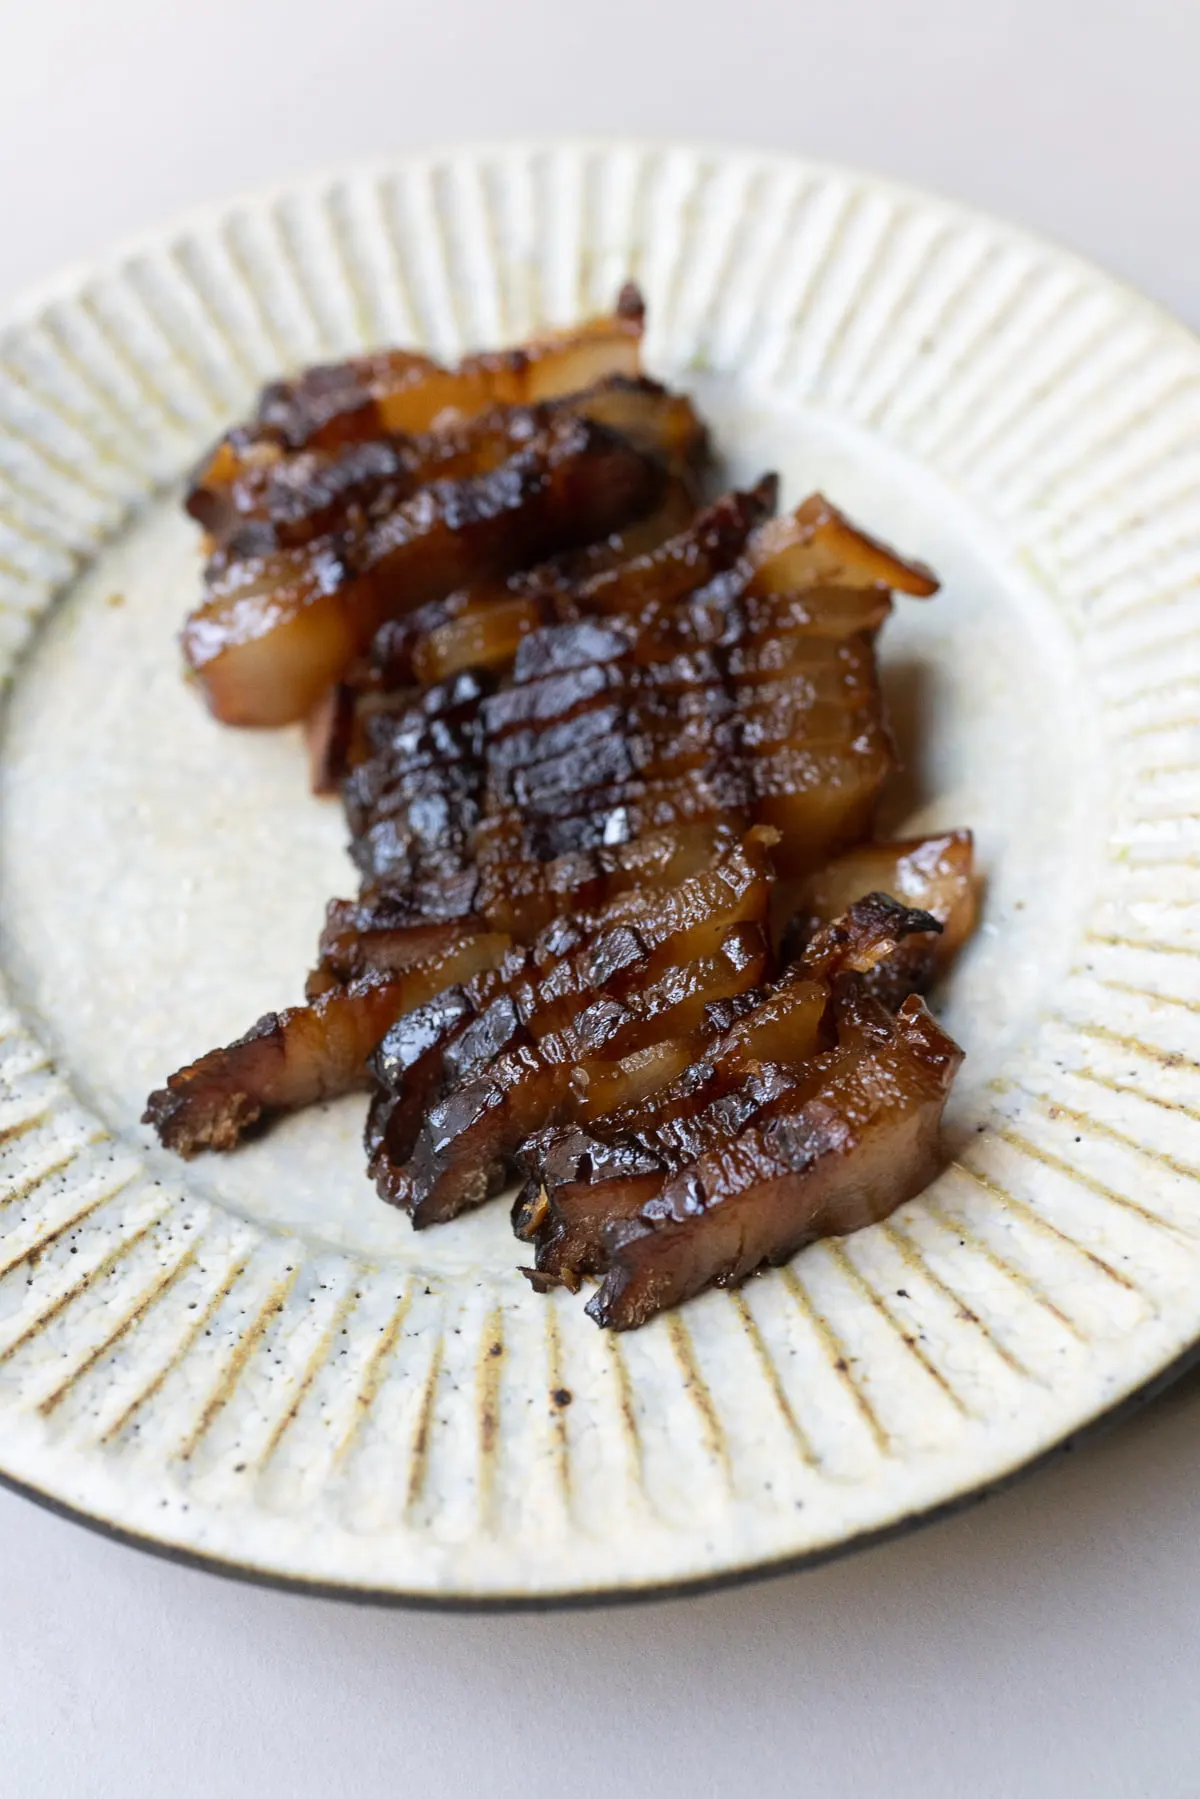 Chinese Bacon, cooked and sliced.